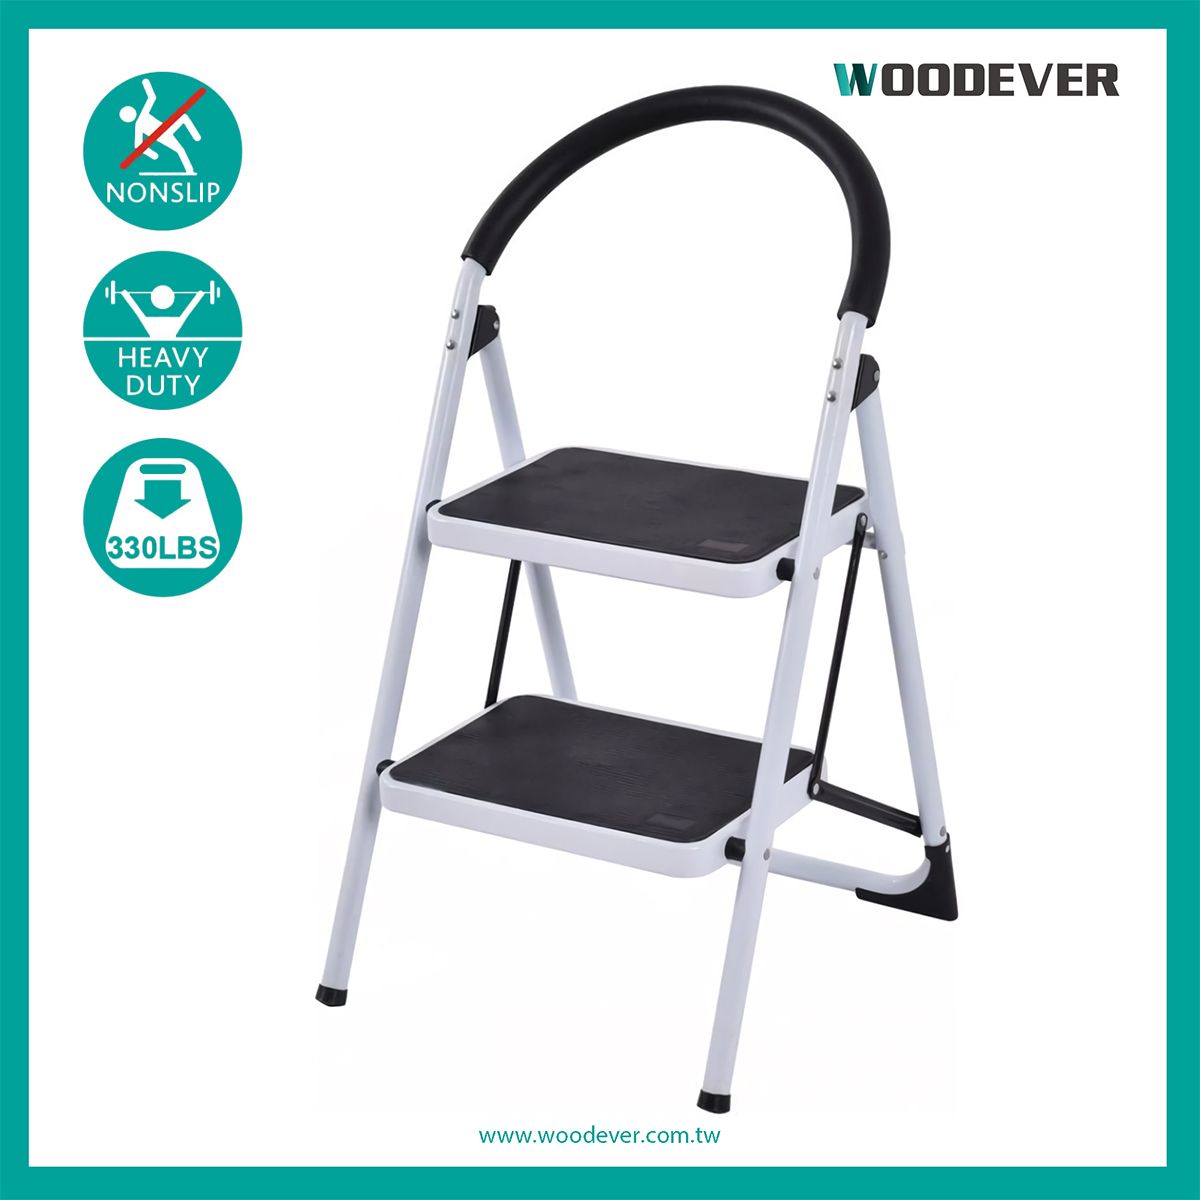 Sturdy, portable, and lightweight but capable of bearing heavy-duty tasks are the outstanding features of this steel folding step stool. This model is constructed from a 0.9 mm steel tube welded into a frame, providing stable support through the strong structure. The maximum load capacity that this model can bear is 150 kg (330 lbs), which is much higher than other small step stools with 2 steps in the same category